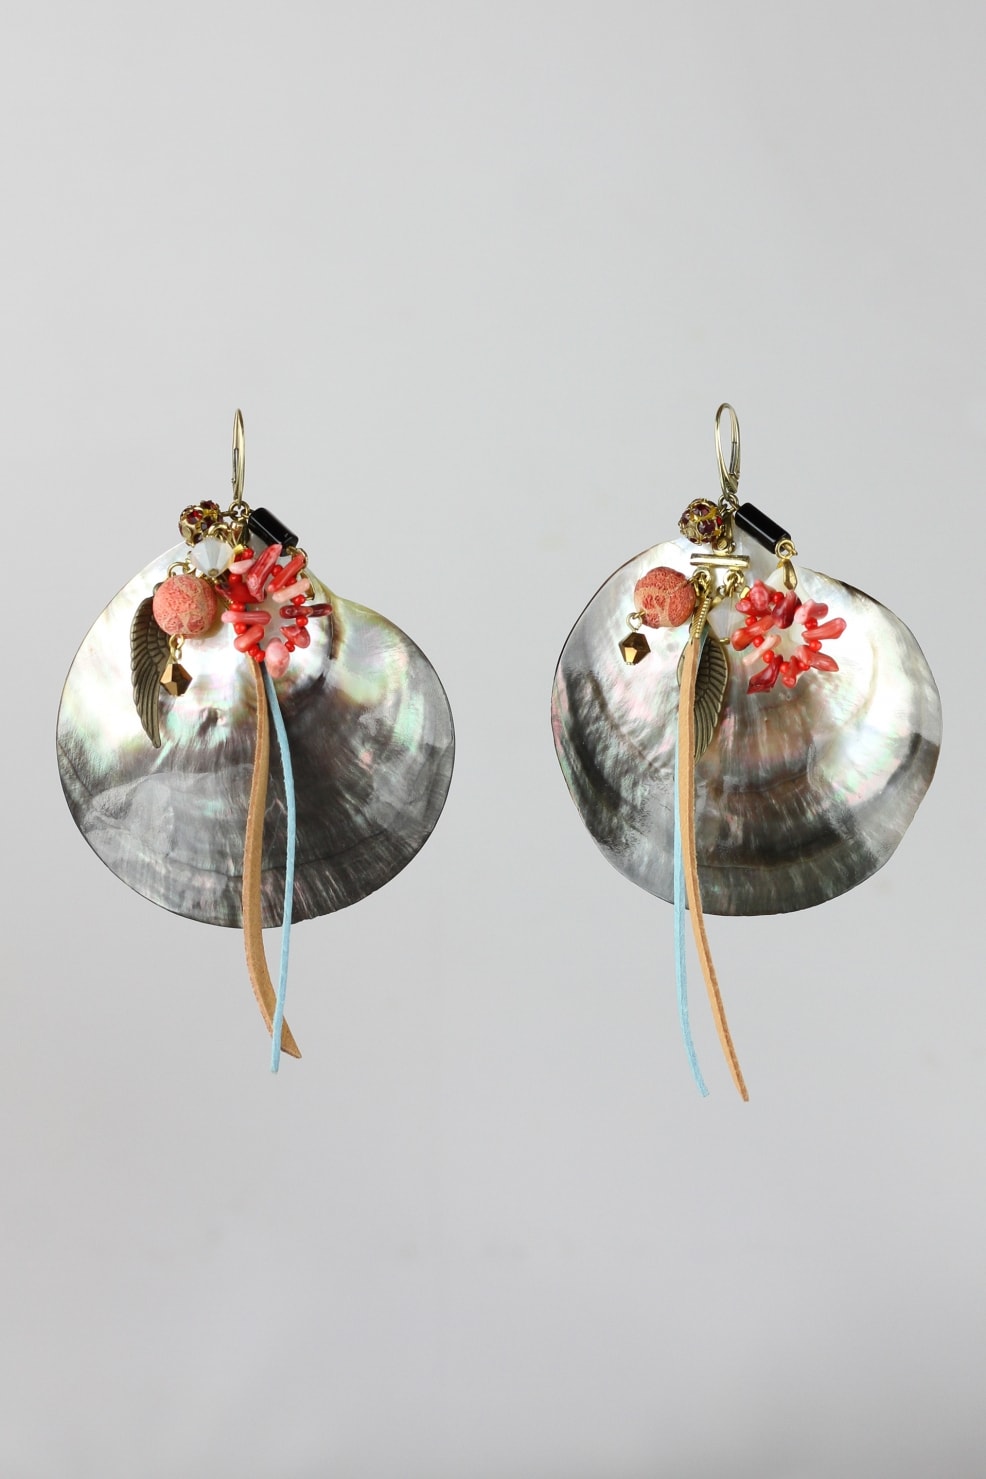 Mother-of-Pearl shell earrings